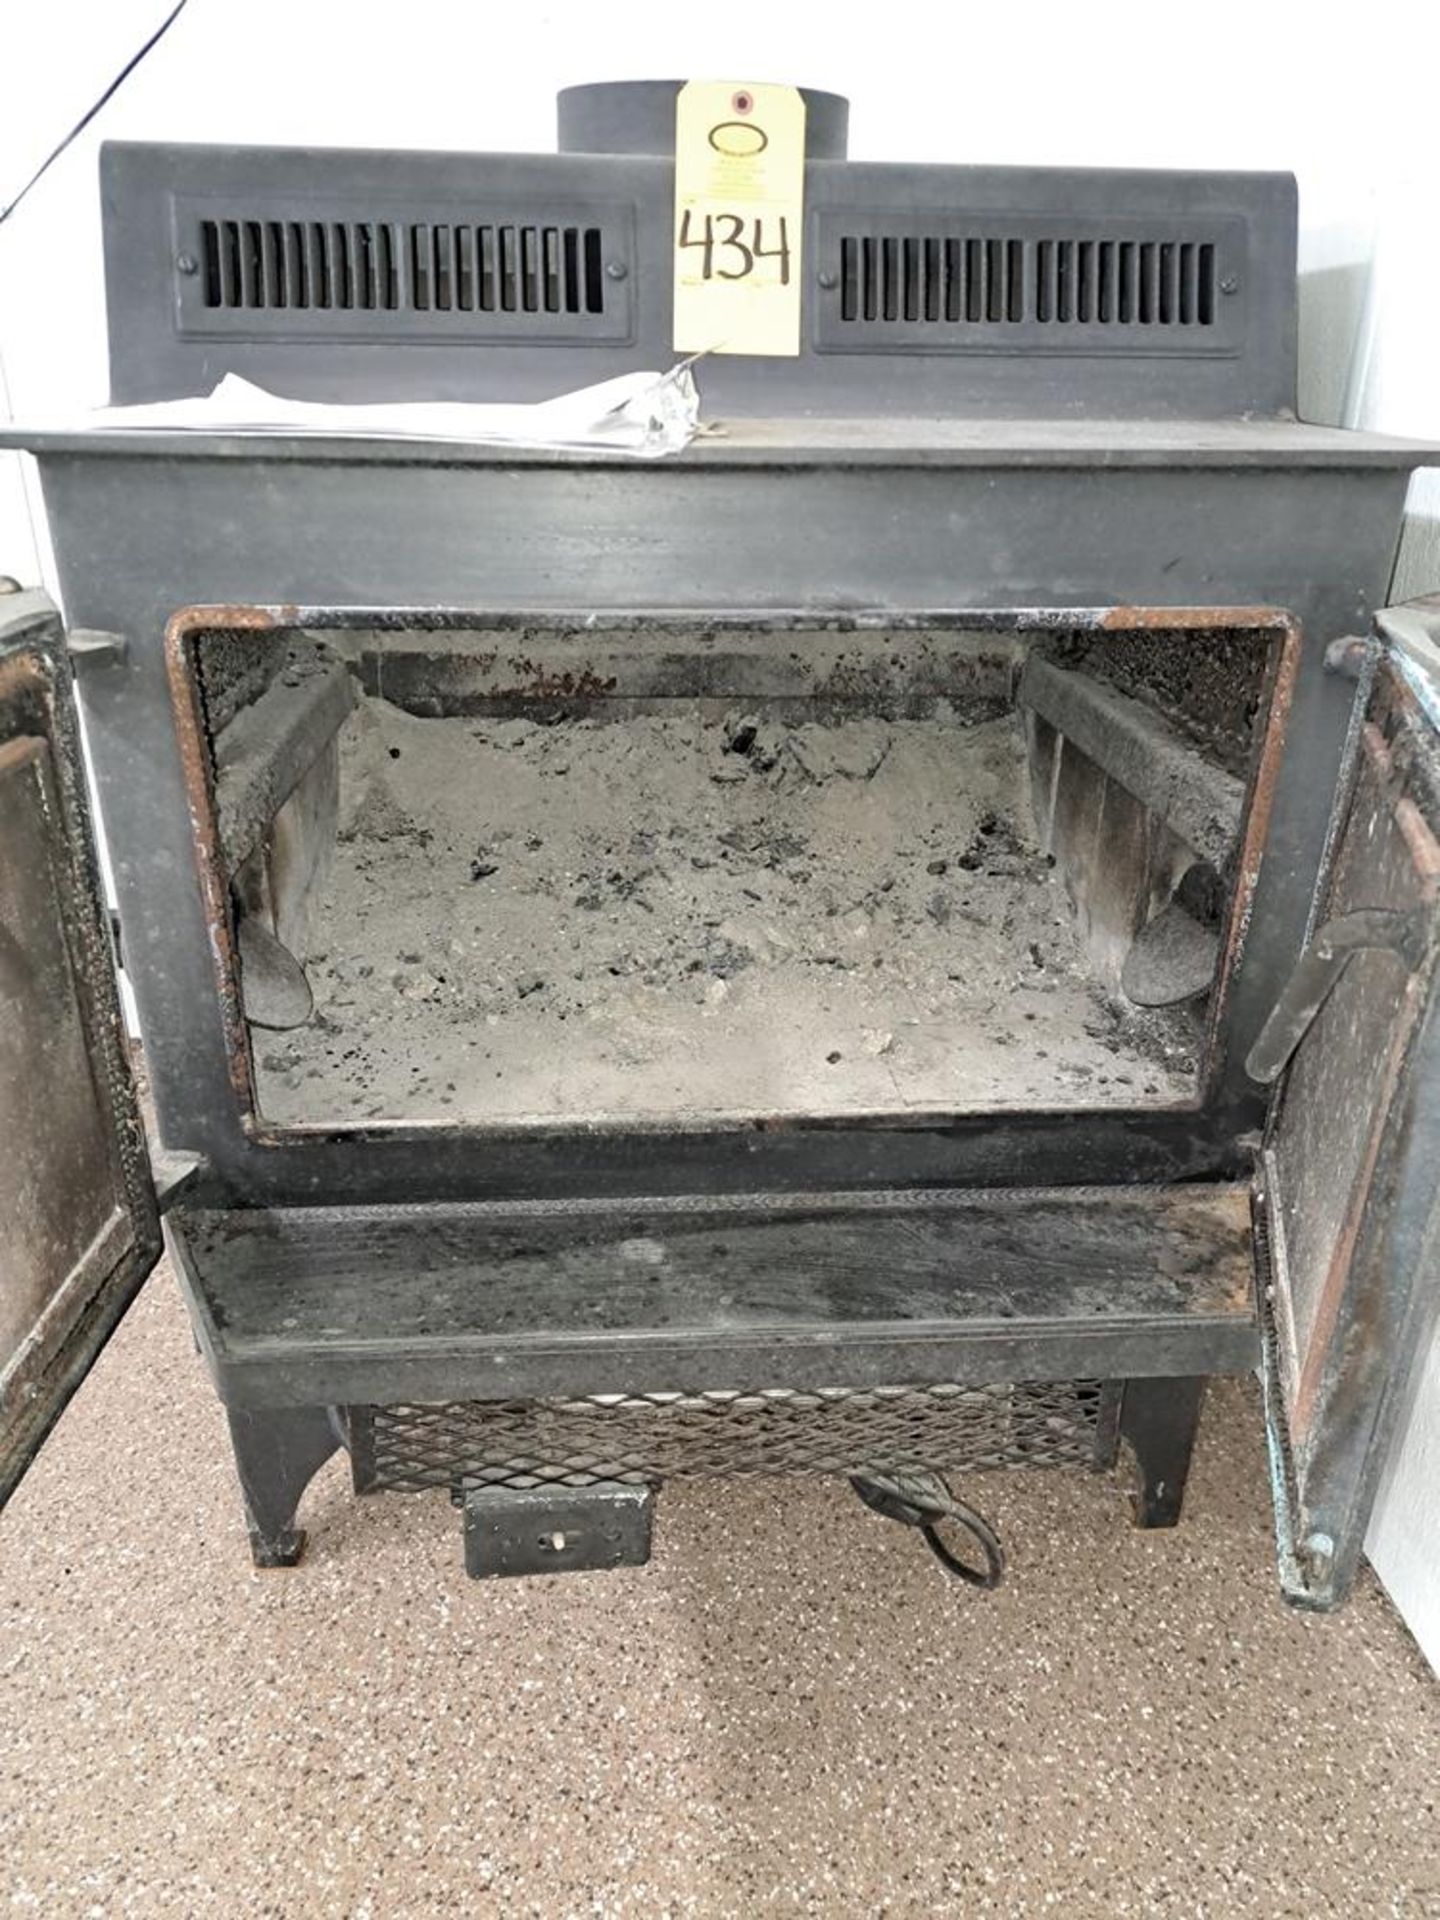 Wood Burning Stove, 30" wide X 32" deep X 36" tall (Required Loading Fee: $50.00) NO HAND CARRY ( - Image 3 of 4